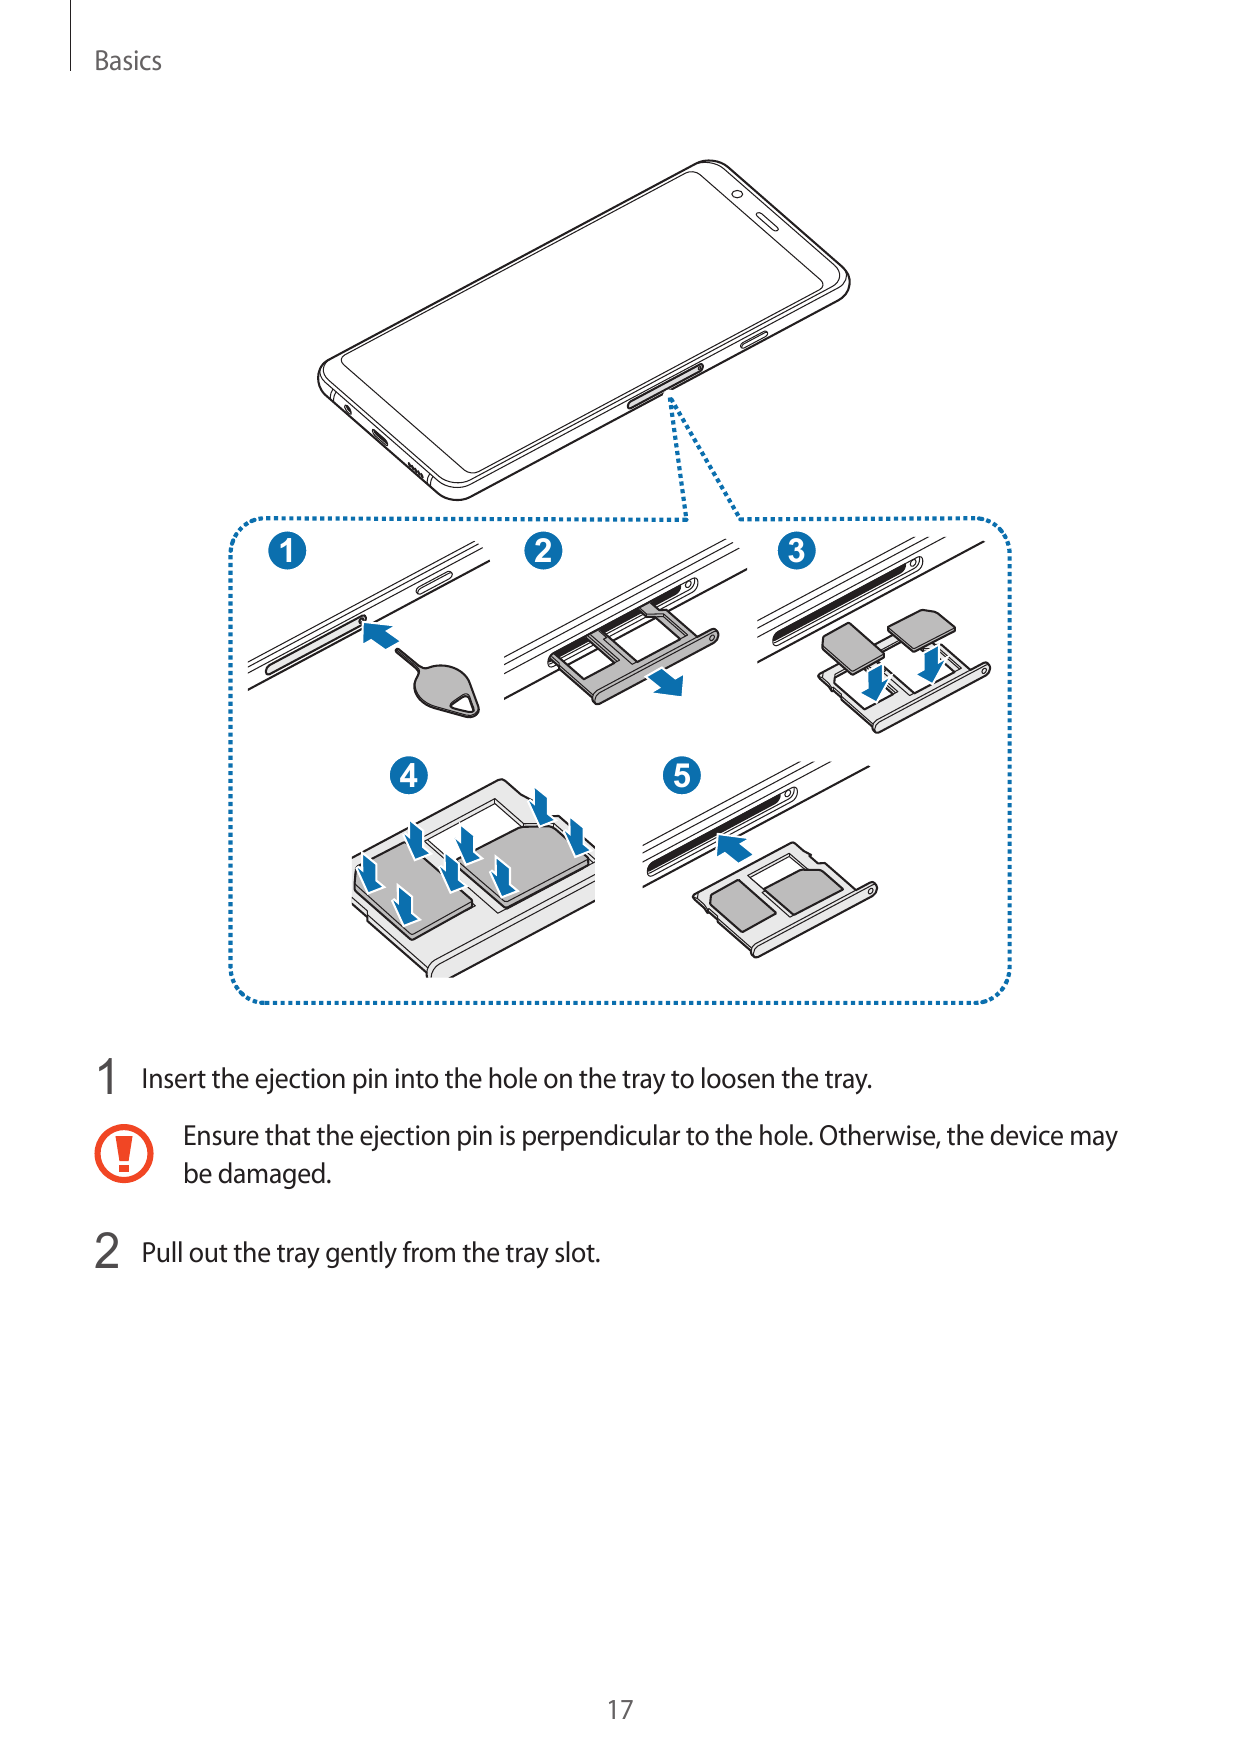 Basics123451 Insert the ejection pin into the hole on the tray to loosen the tray.Ensure that the ejection pin is perpendicular 